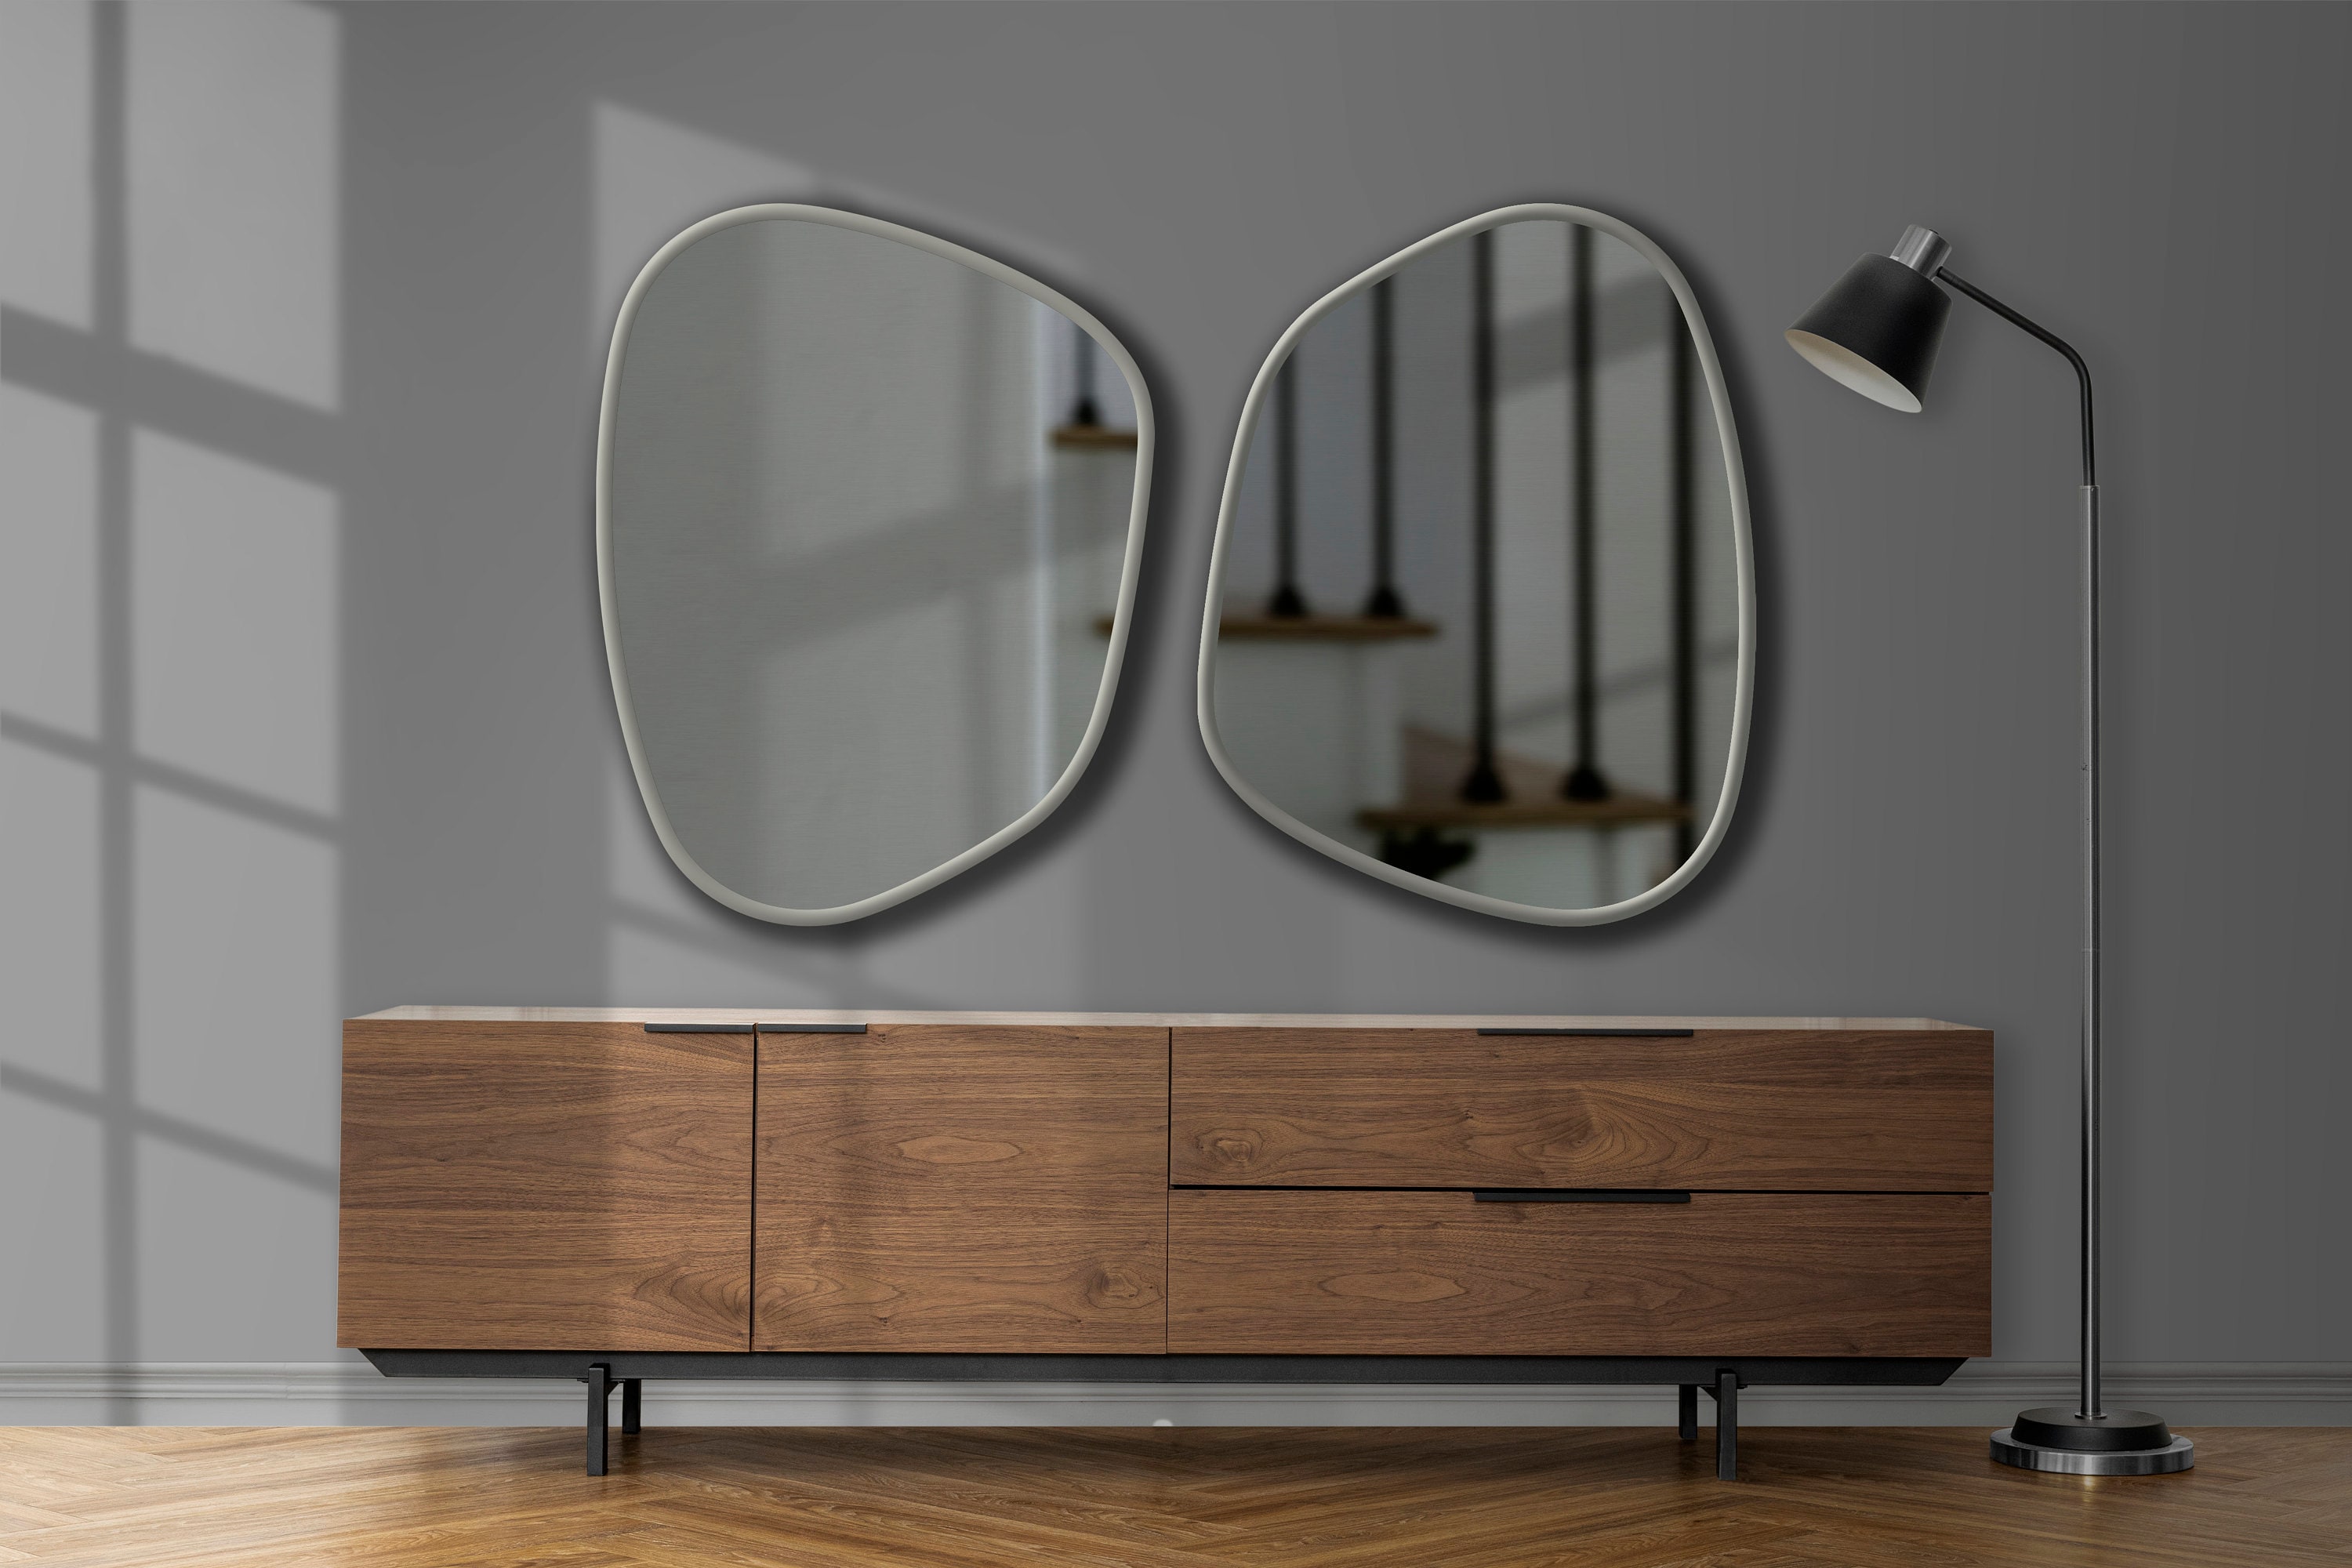 Two asymmetrical mirrors with silver frame hung on the wall of a living room above a wood drawer.